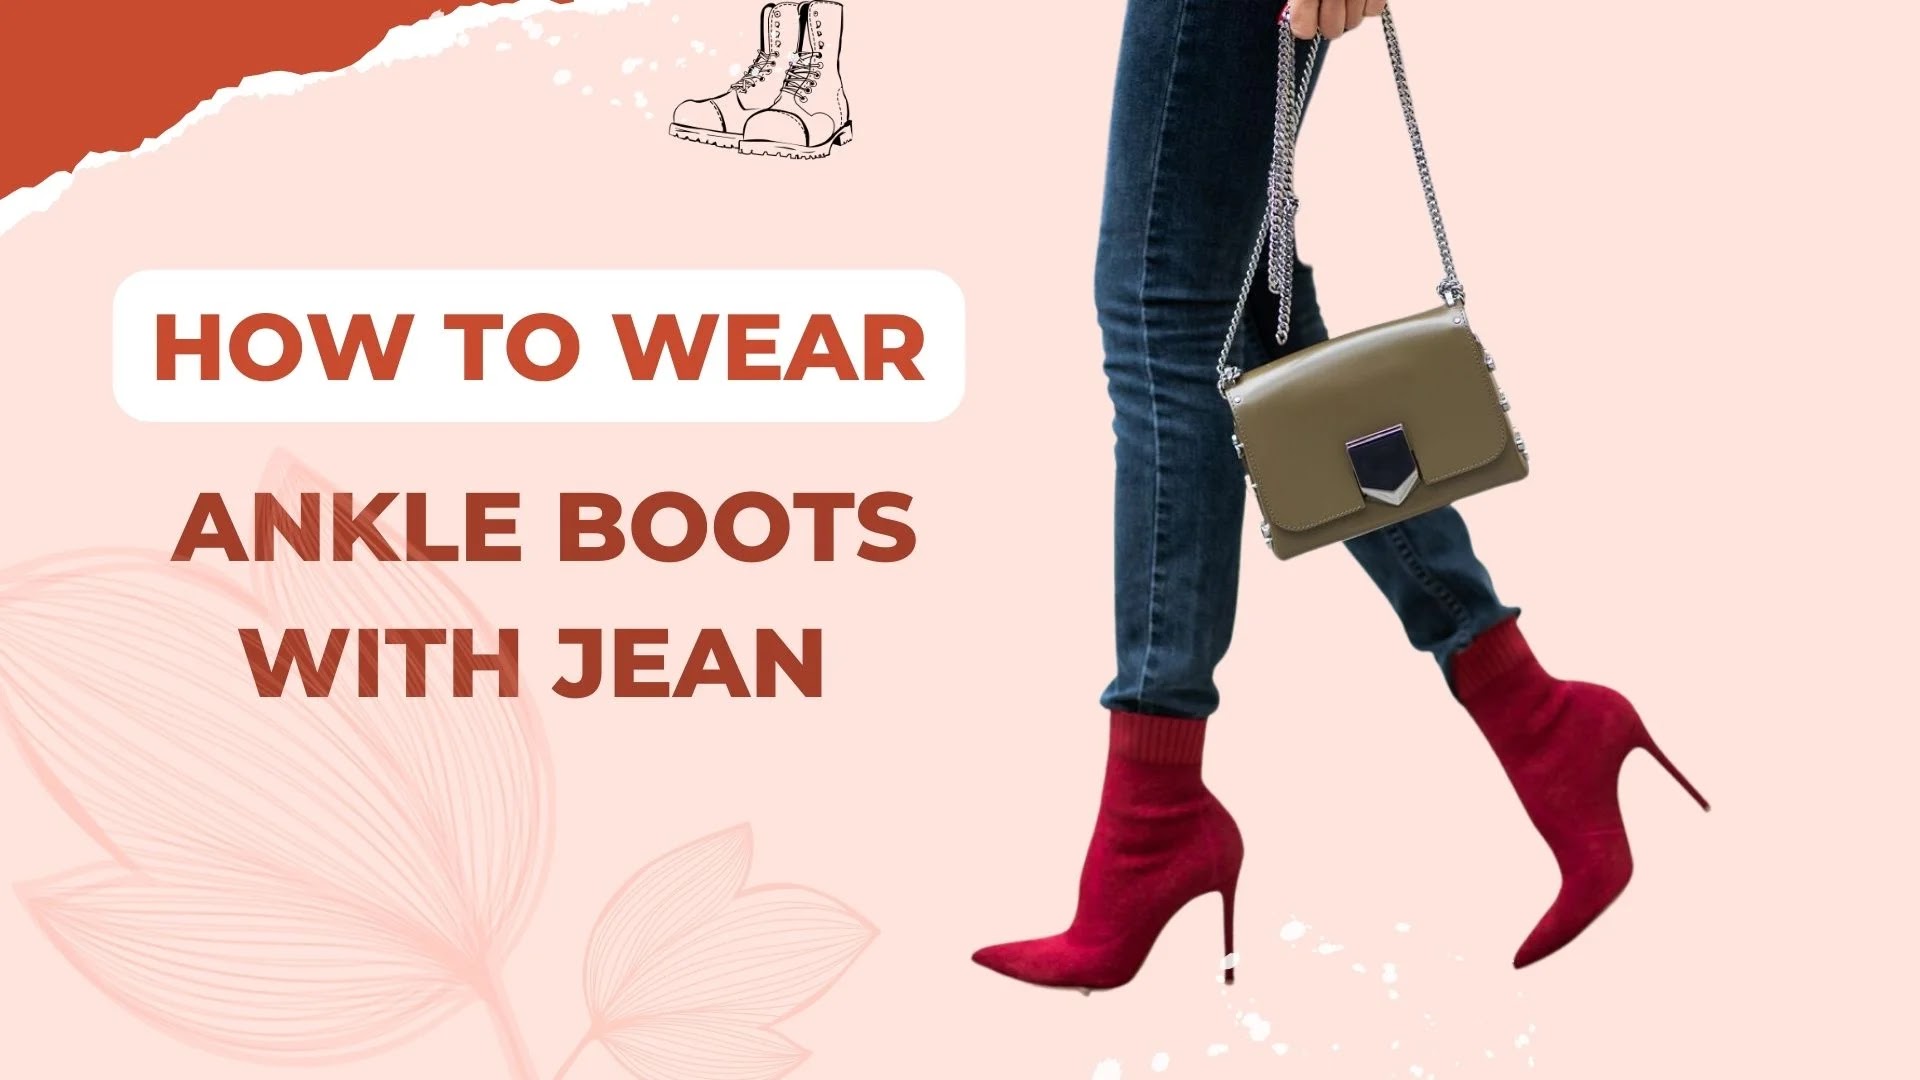 Ankle Boots With Jeans How to Wear Them and Look Stylish